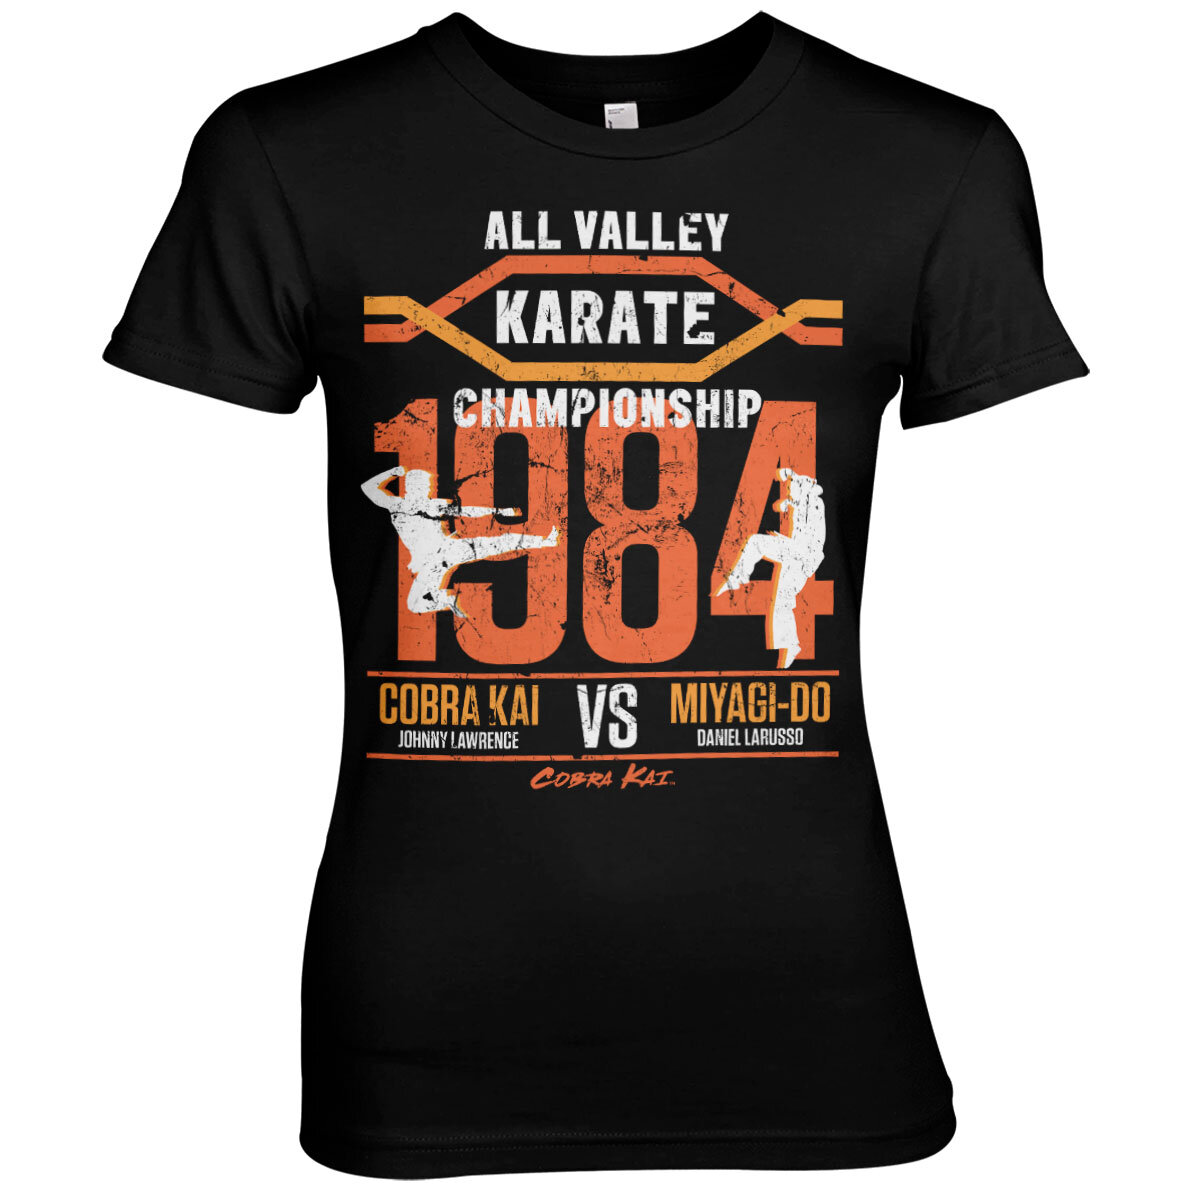 All Valley Karate Championship Girly Tee